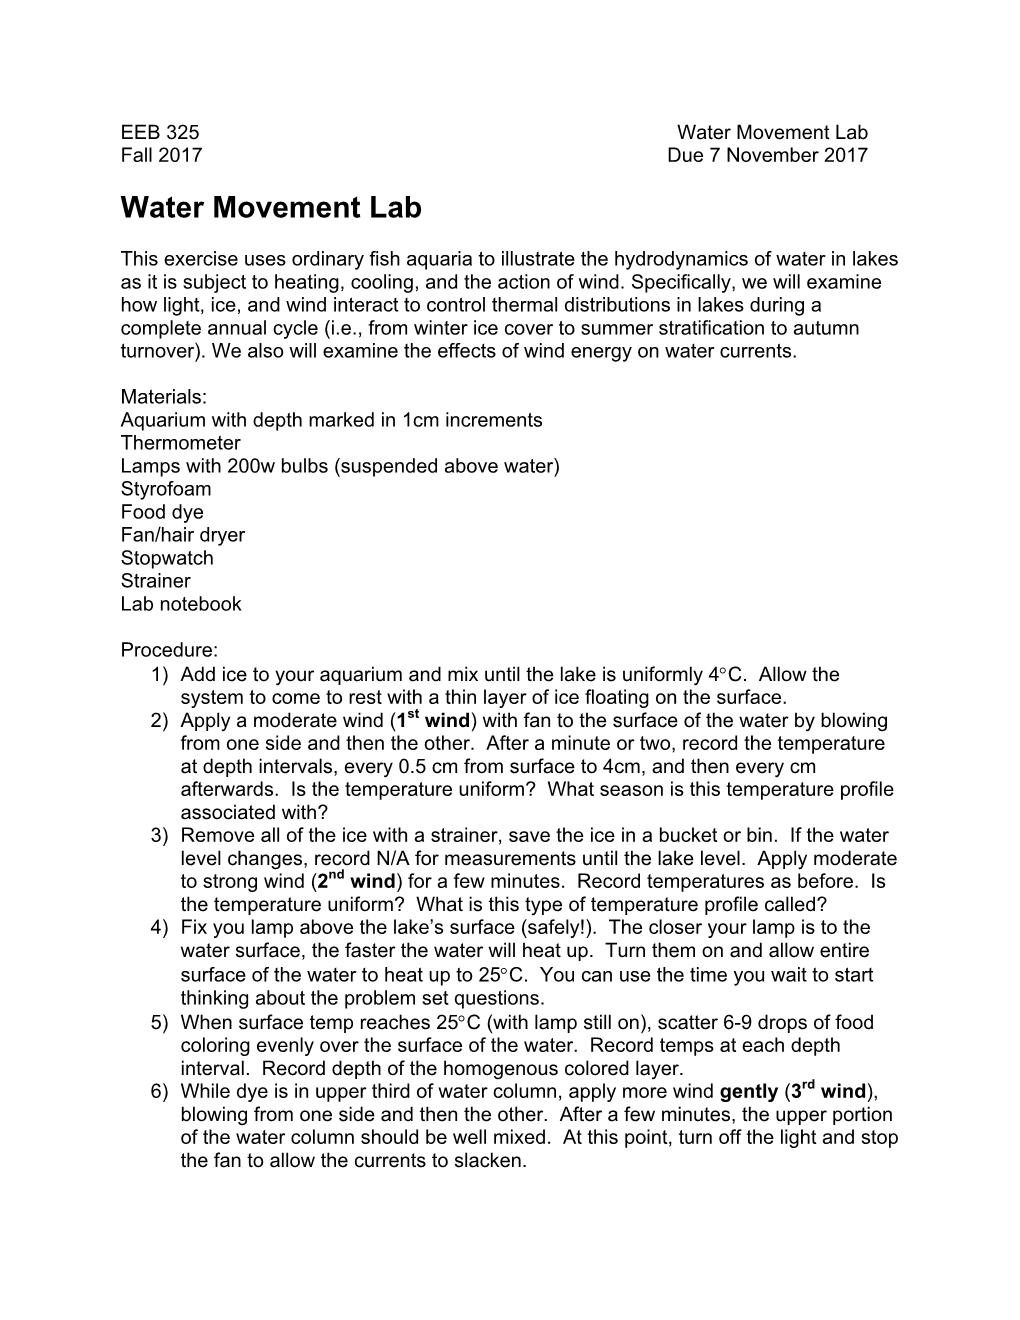 Water Movement Lab Fall 2017 Due 7 November 2017 Water Movement Lab